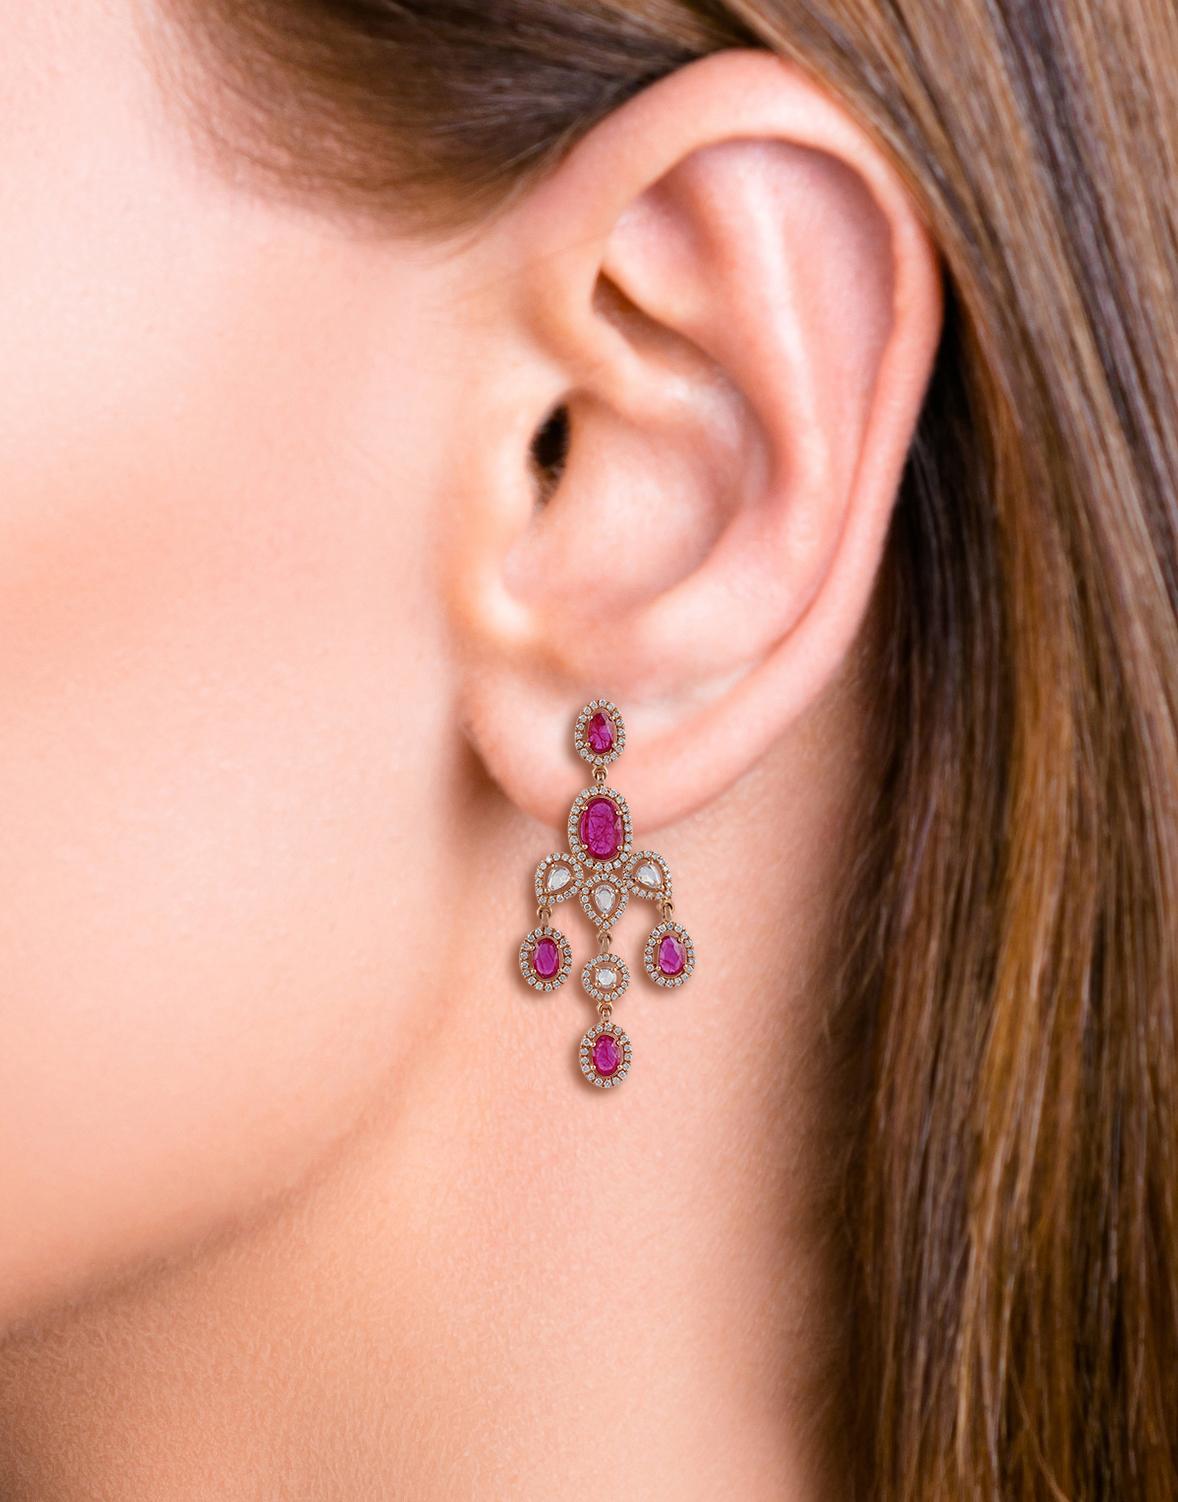 Contemporary Ruby and Diamond Earrings Studded in 18 Karat Rose Gold